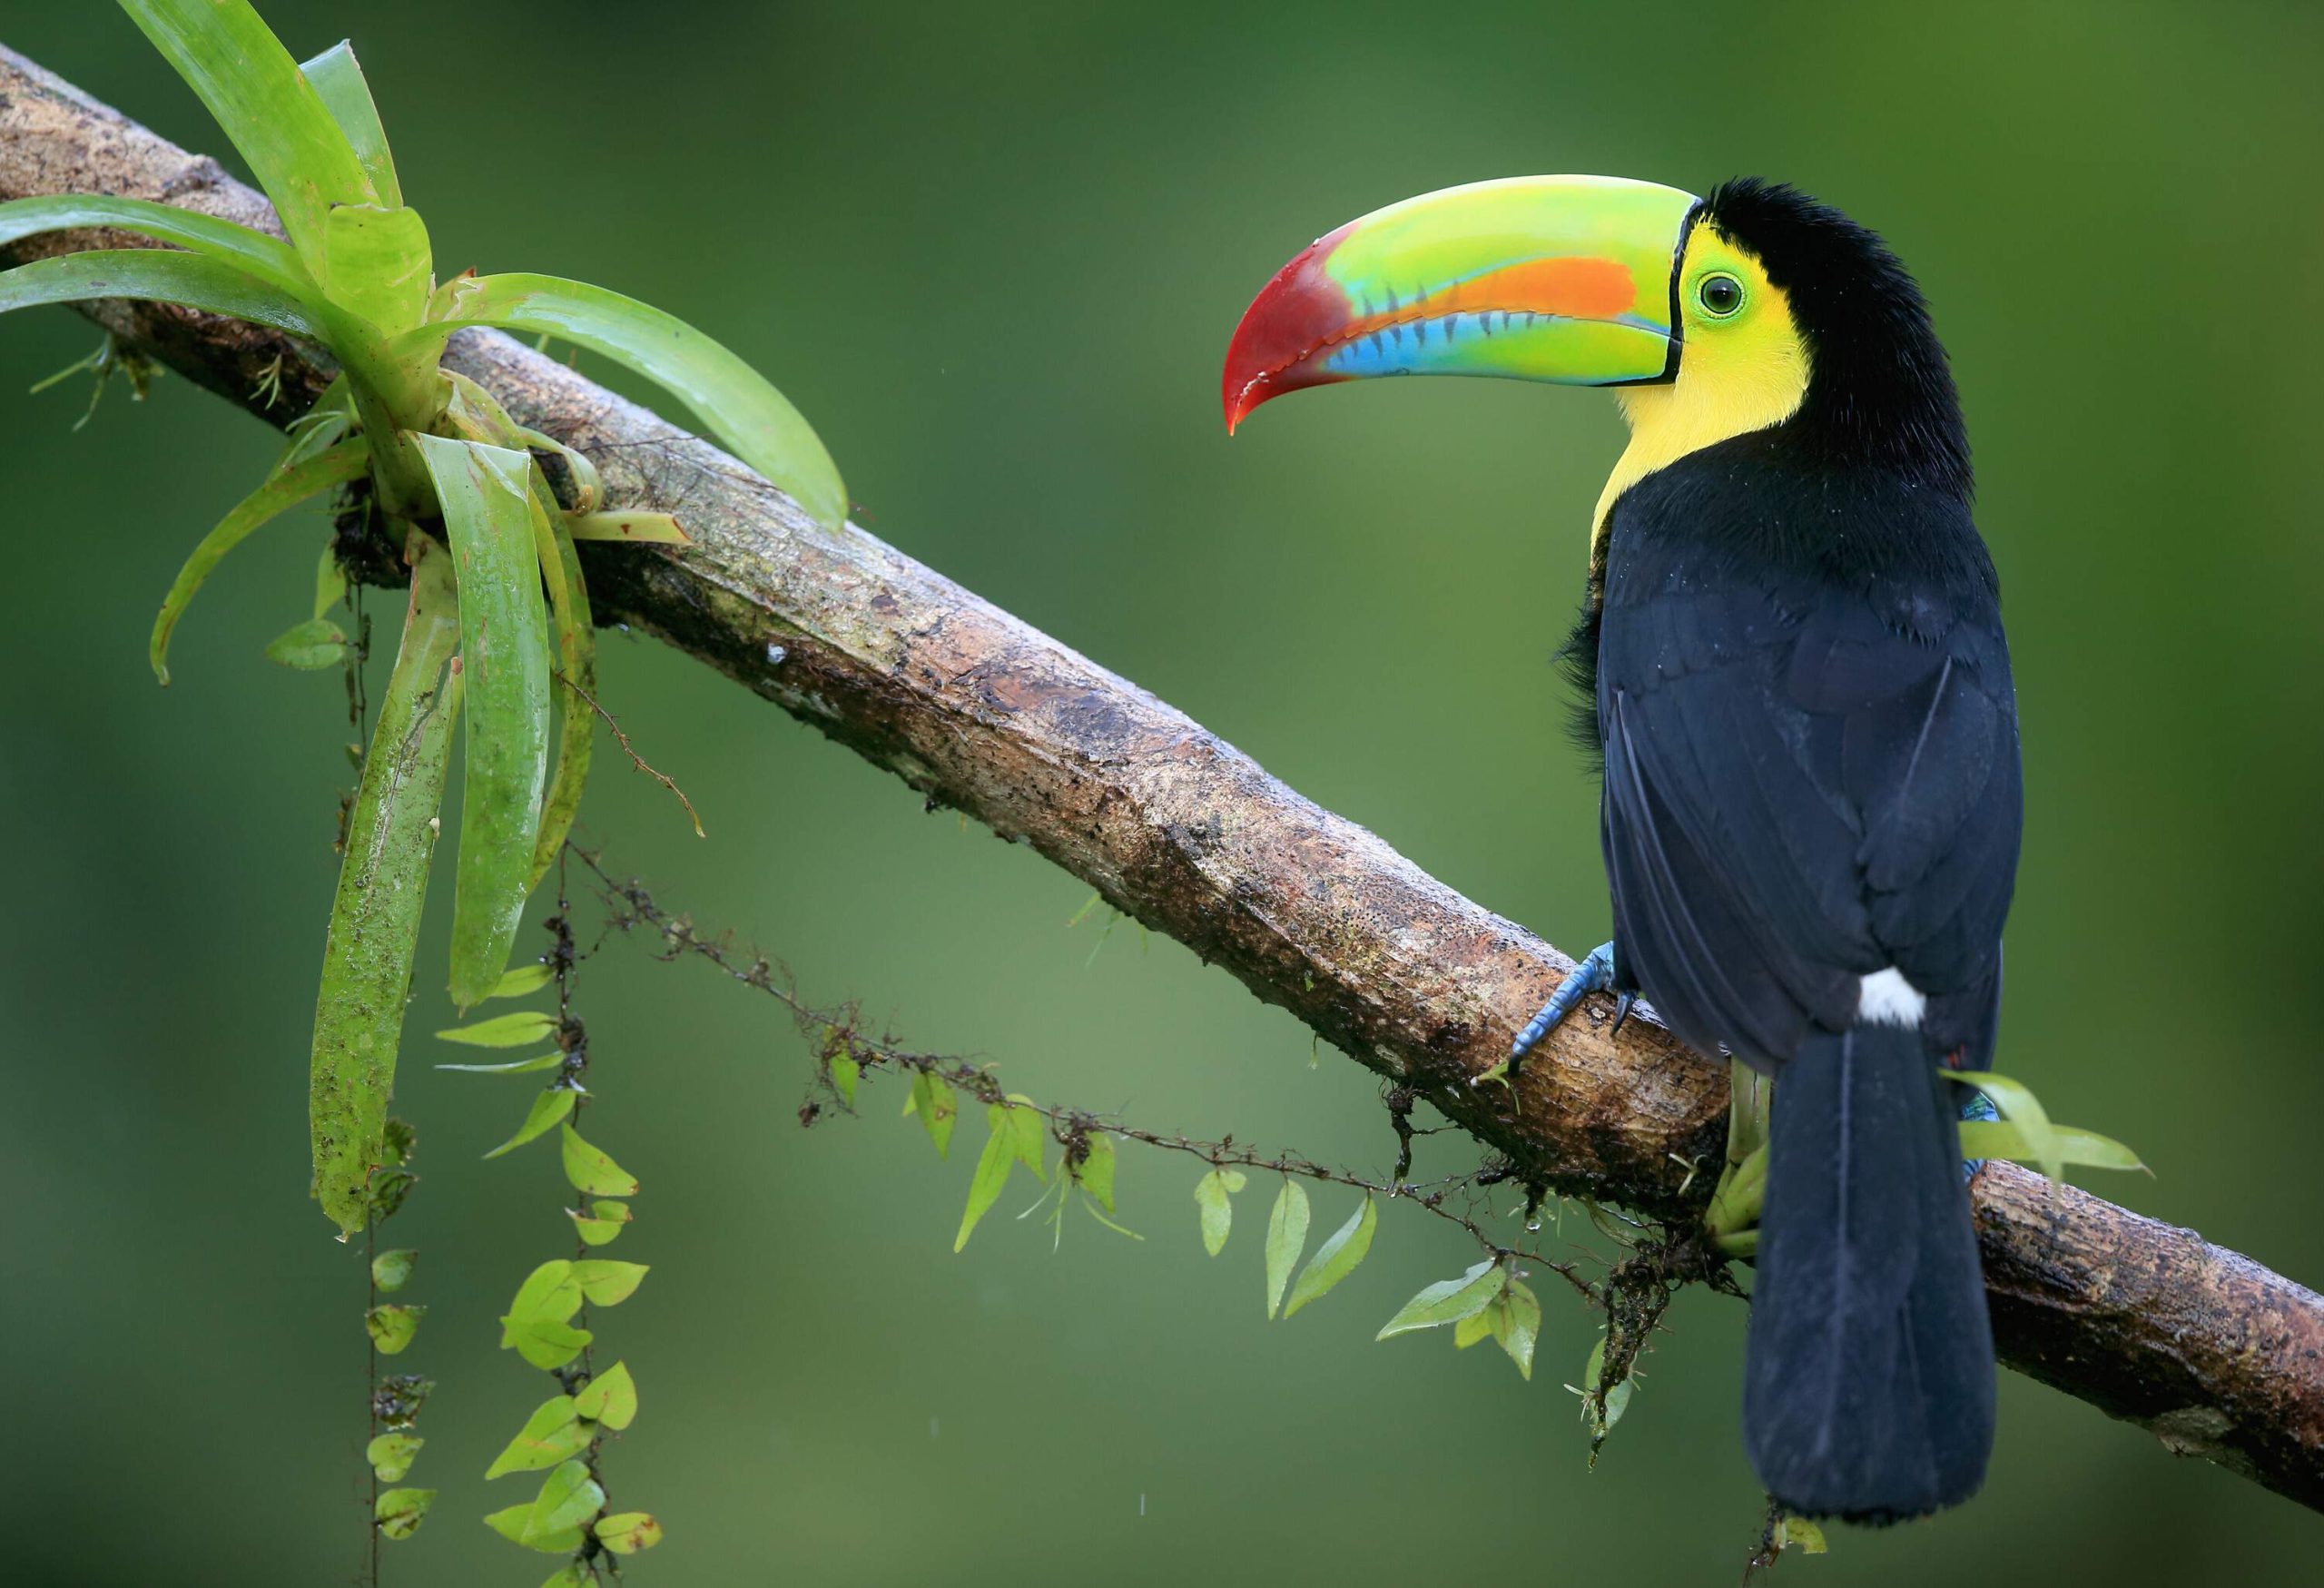 A black toucan with yellow and red beak rests on a tree branch.